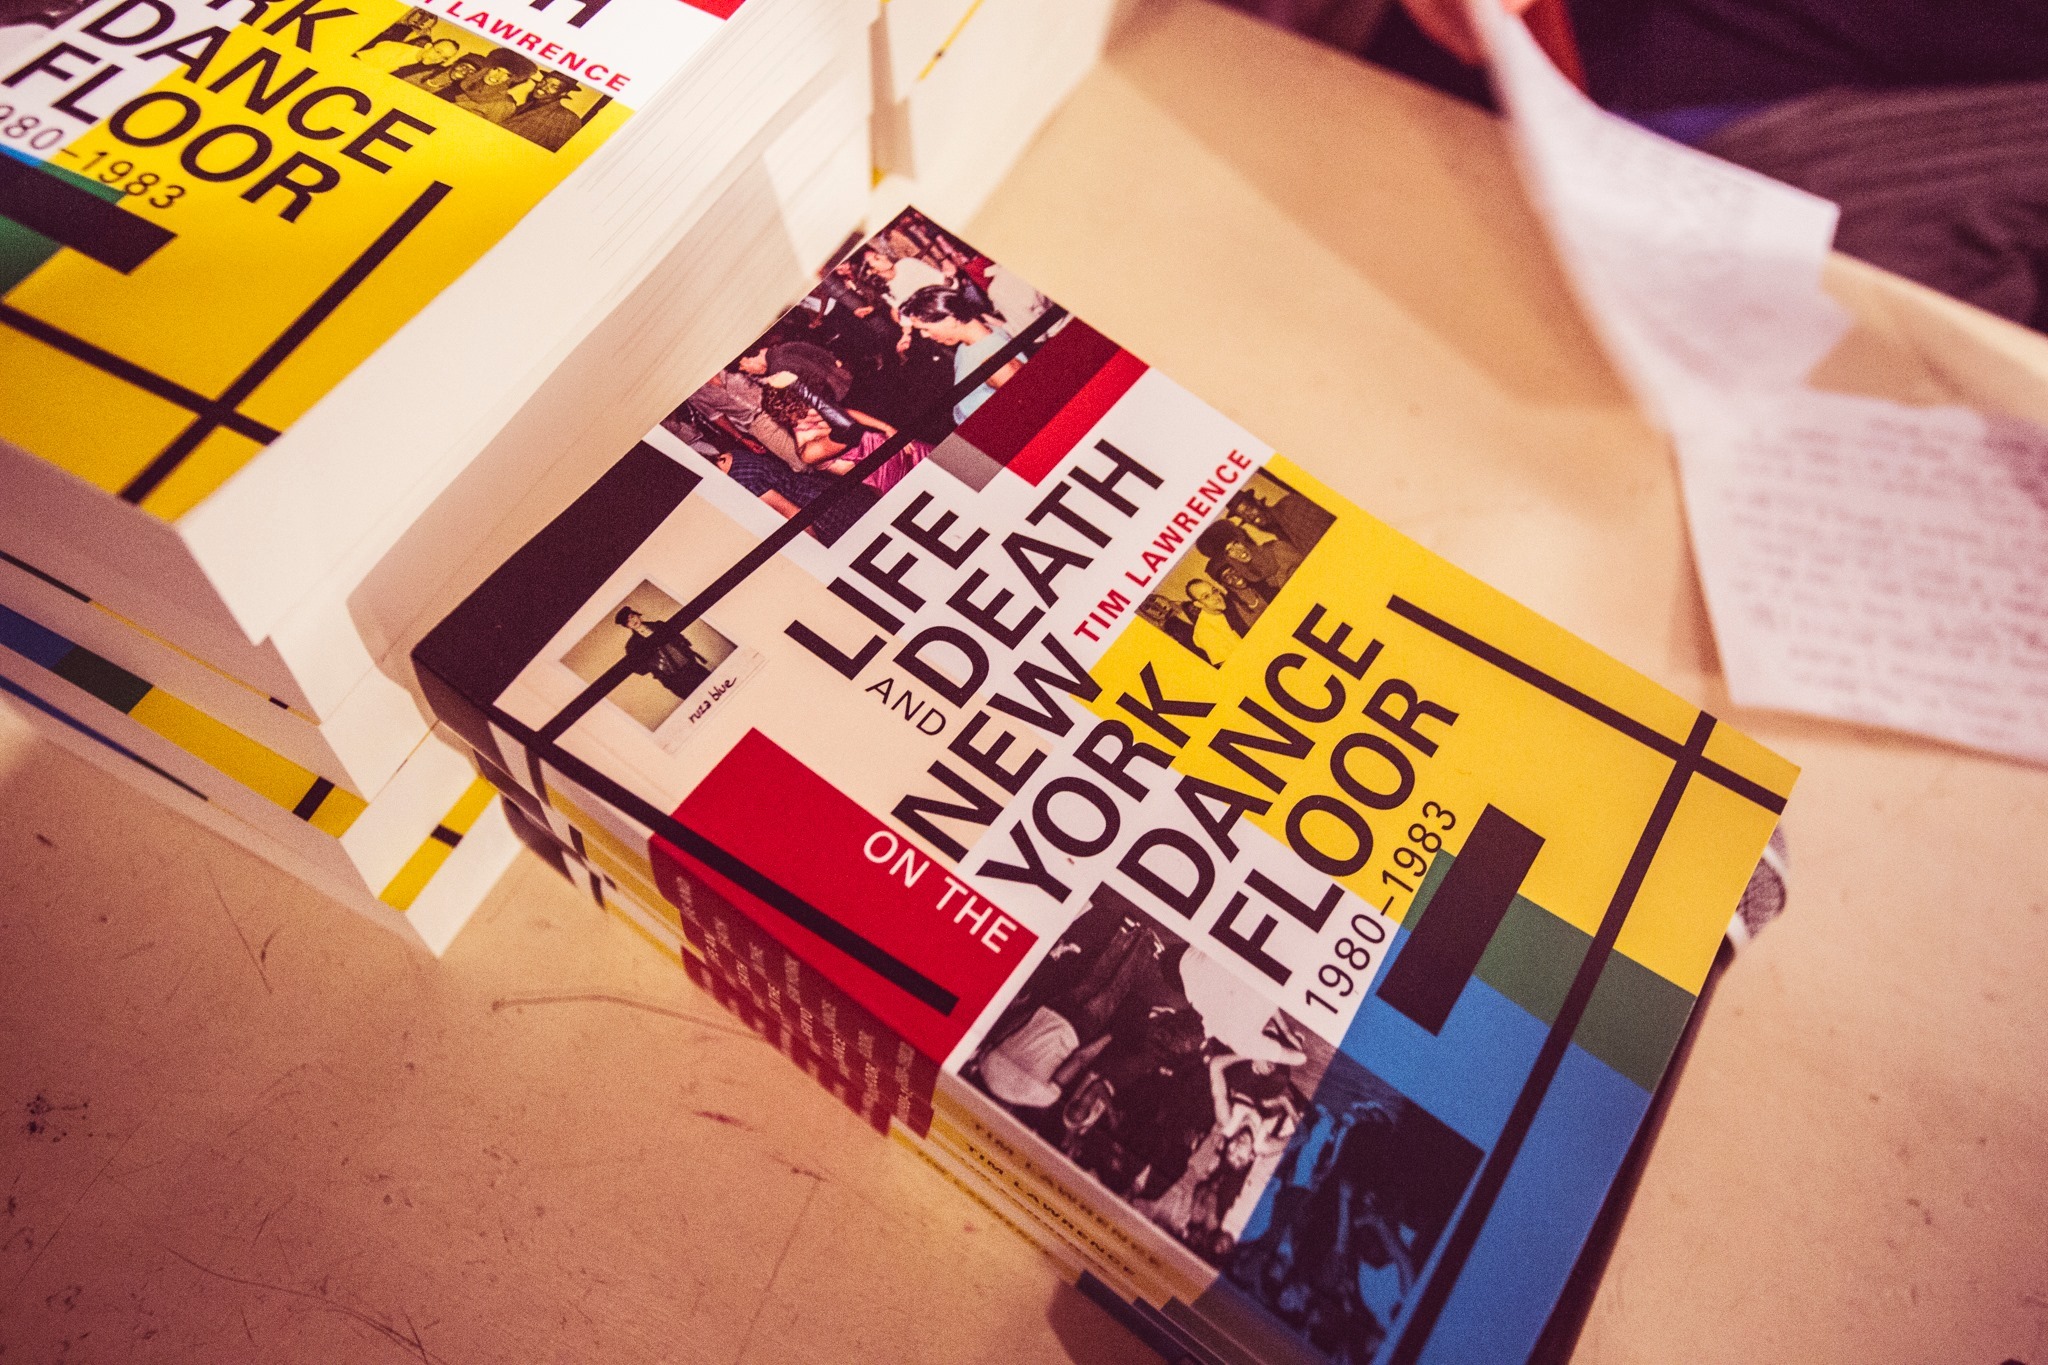 The book in Vilnius. Thanks to Marston for arranging such a speedy delivery. Photo by Tautvydas Stukas..jpg